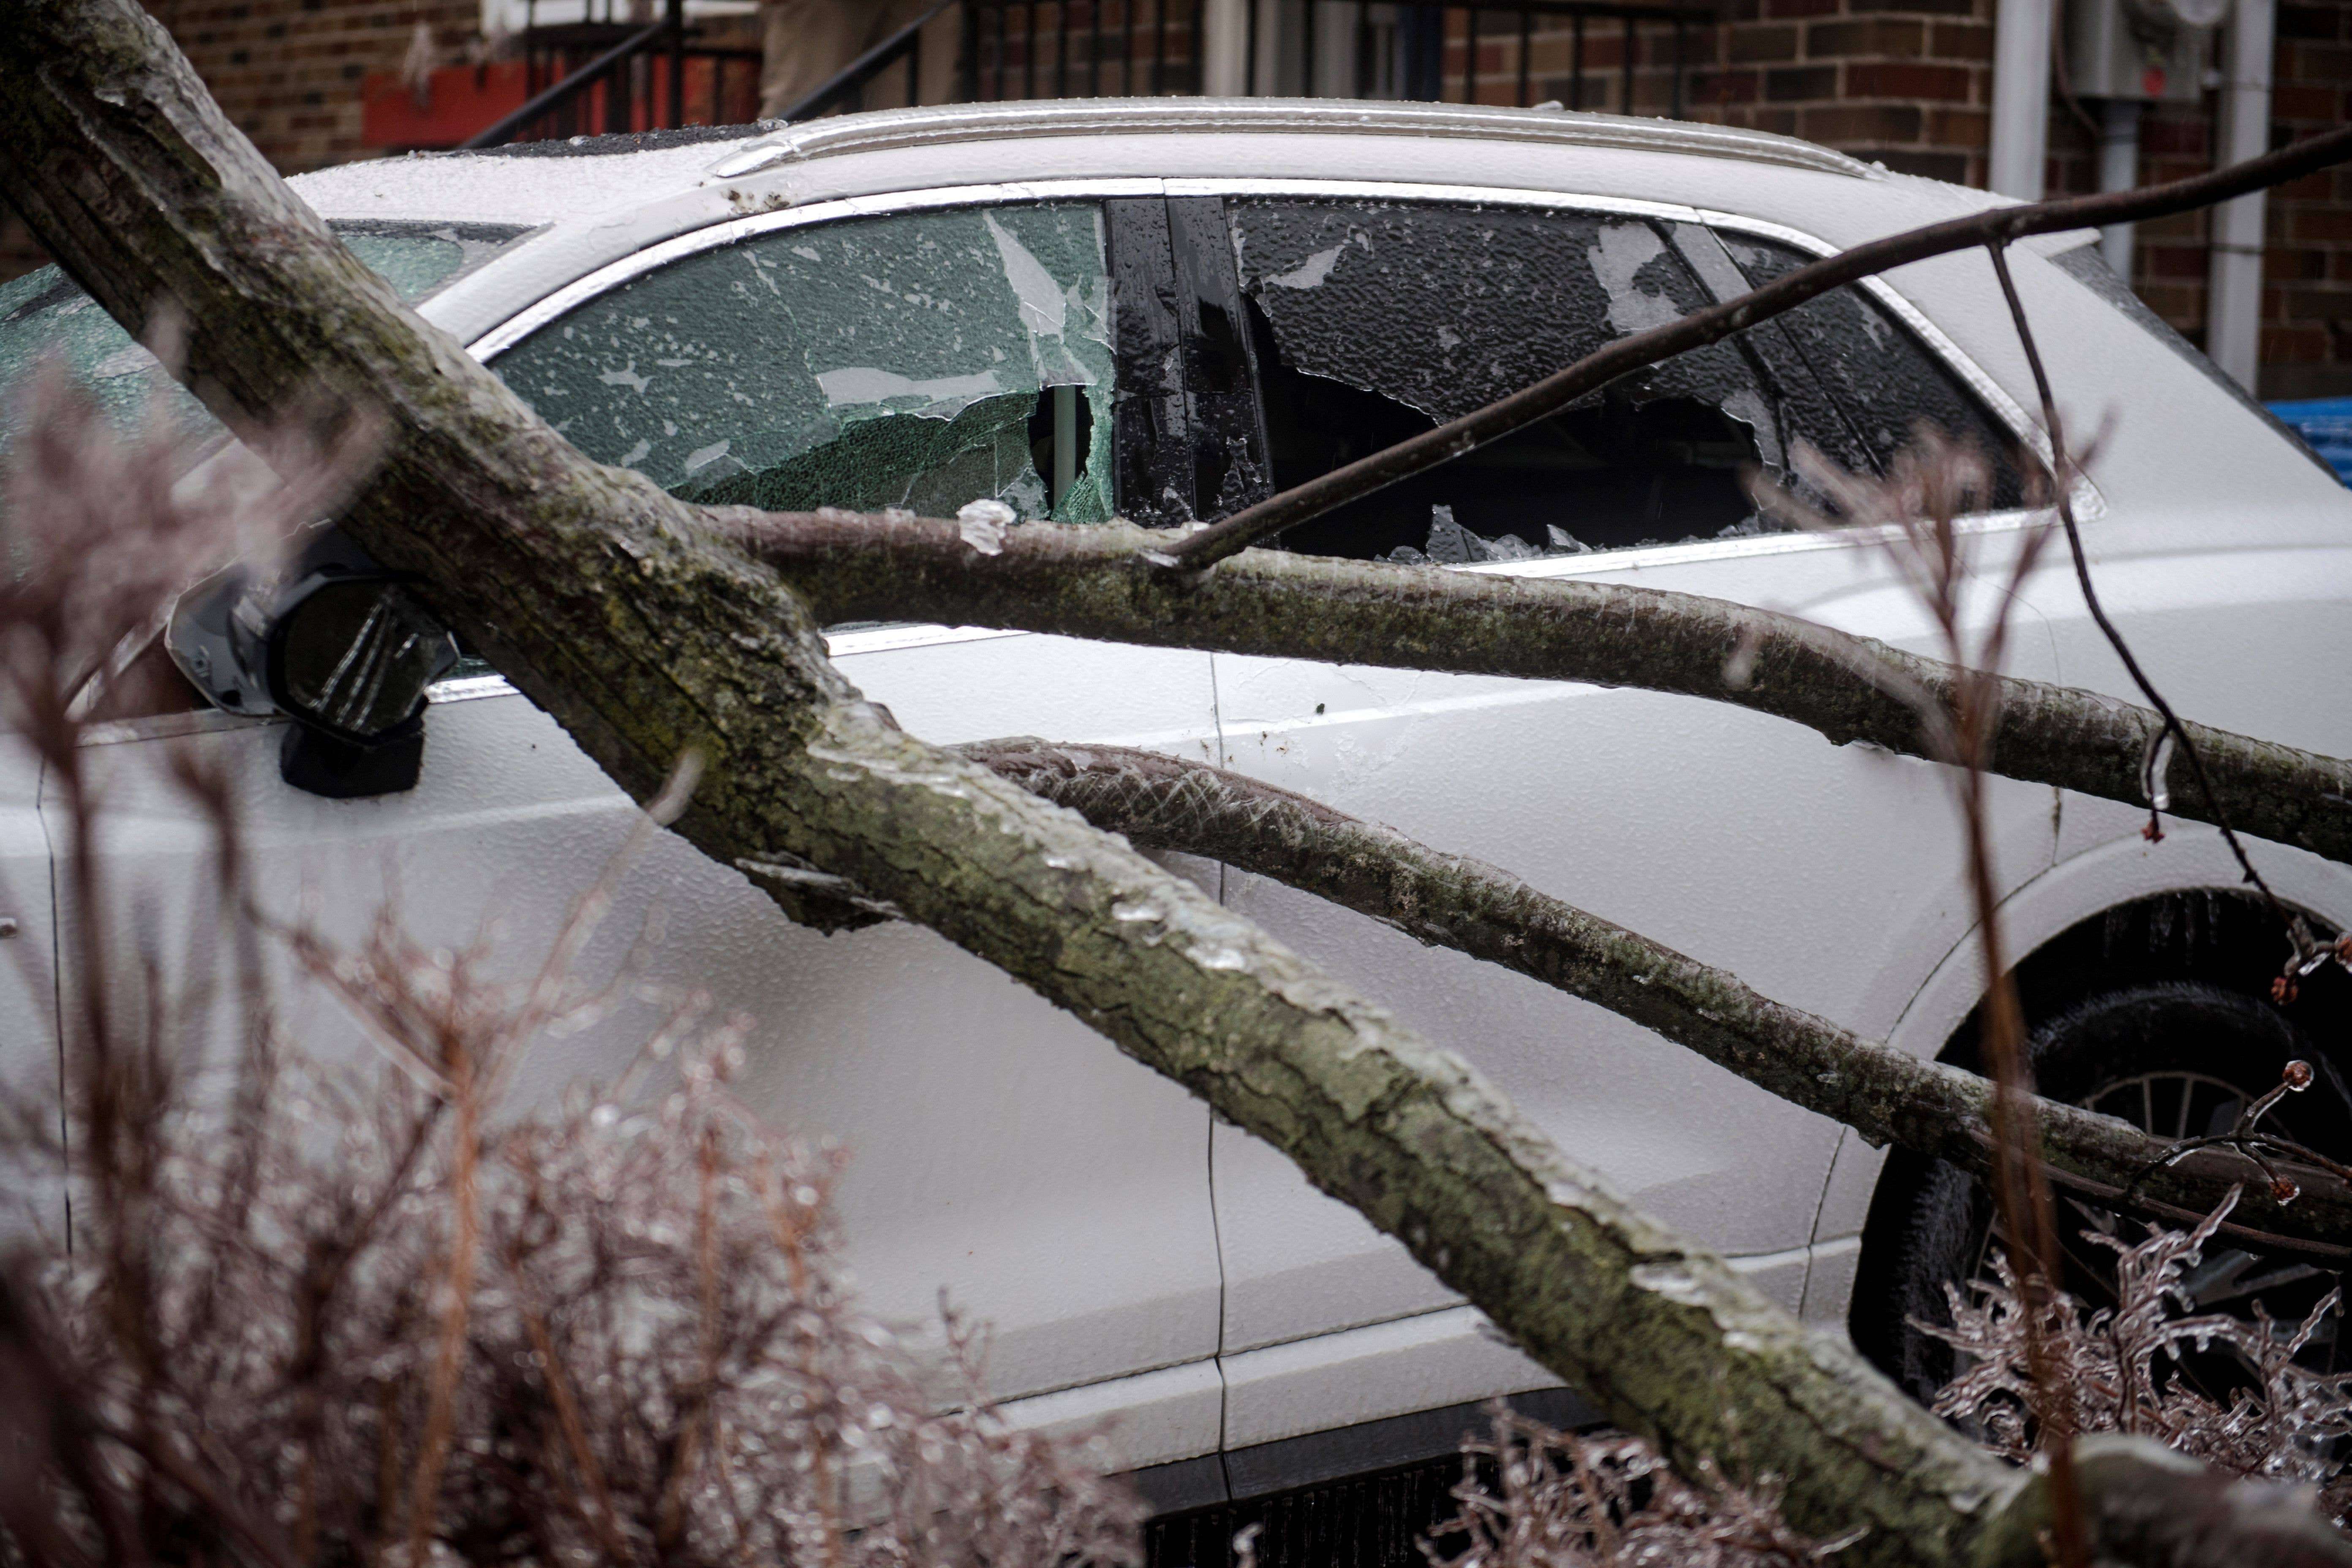 PHOTOS: Signature Oak sustains some damage after ice storm